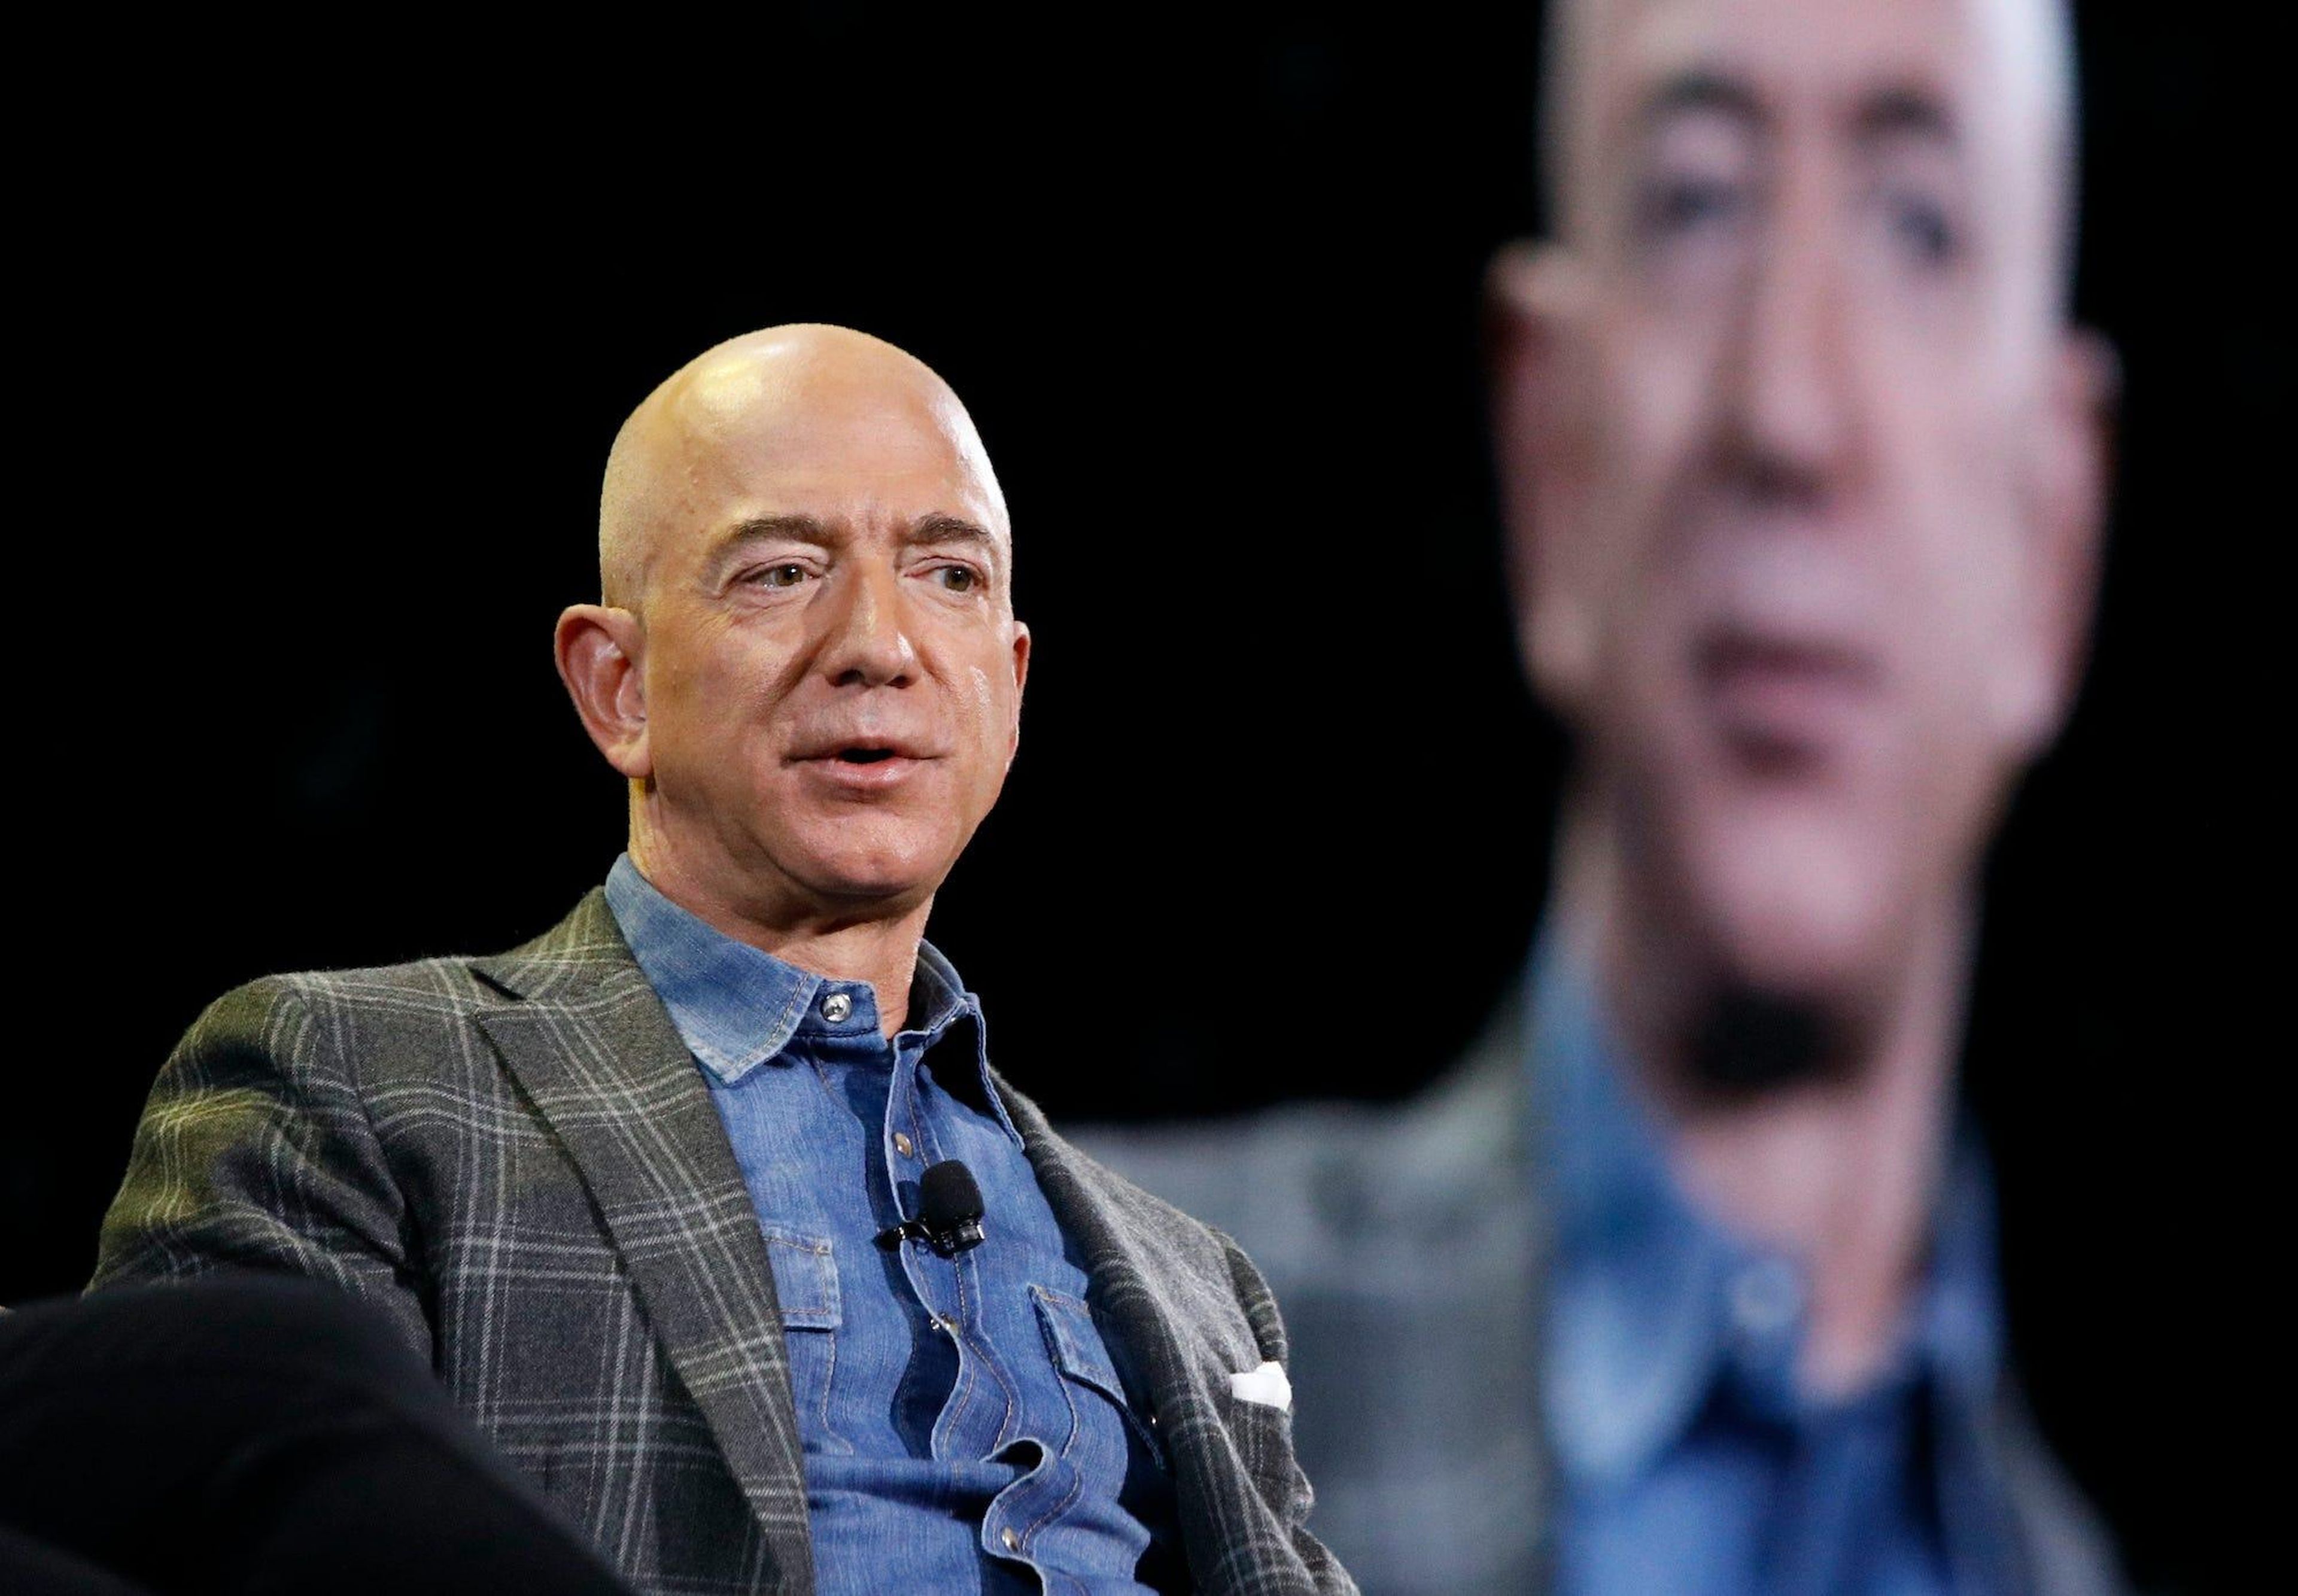 Failure pays off if you want to figure out what customers really want, writes Bezos.